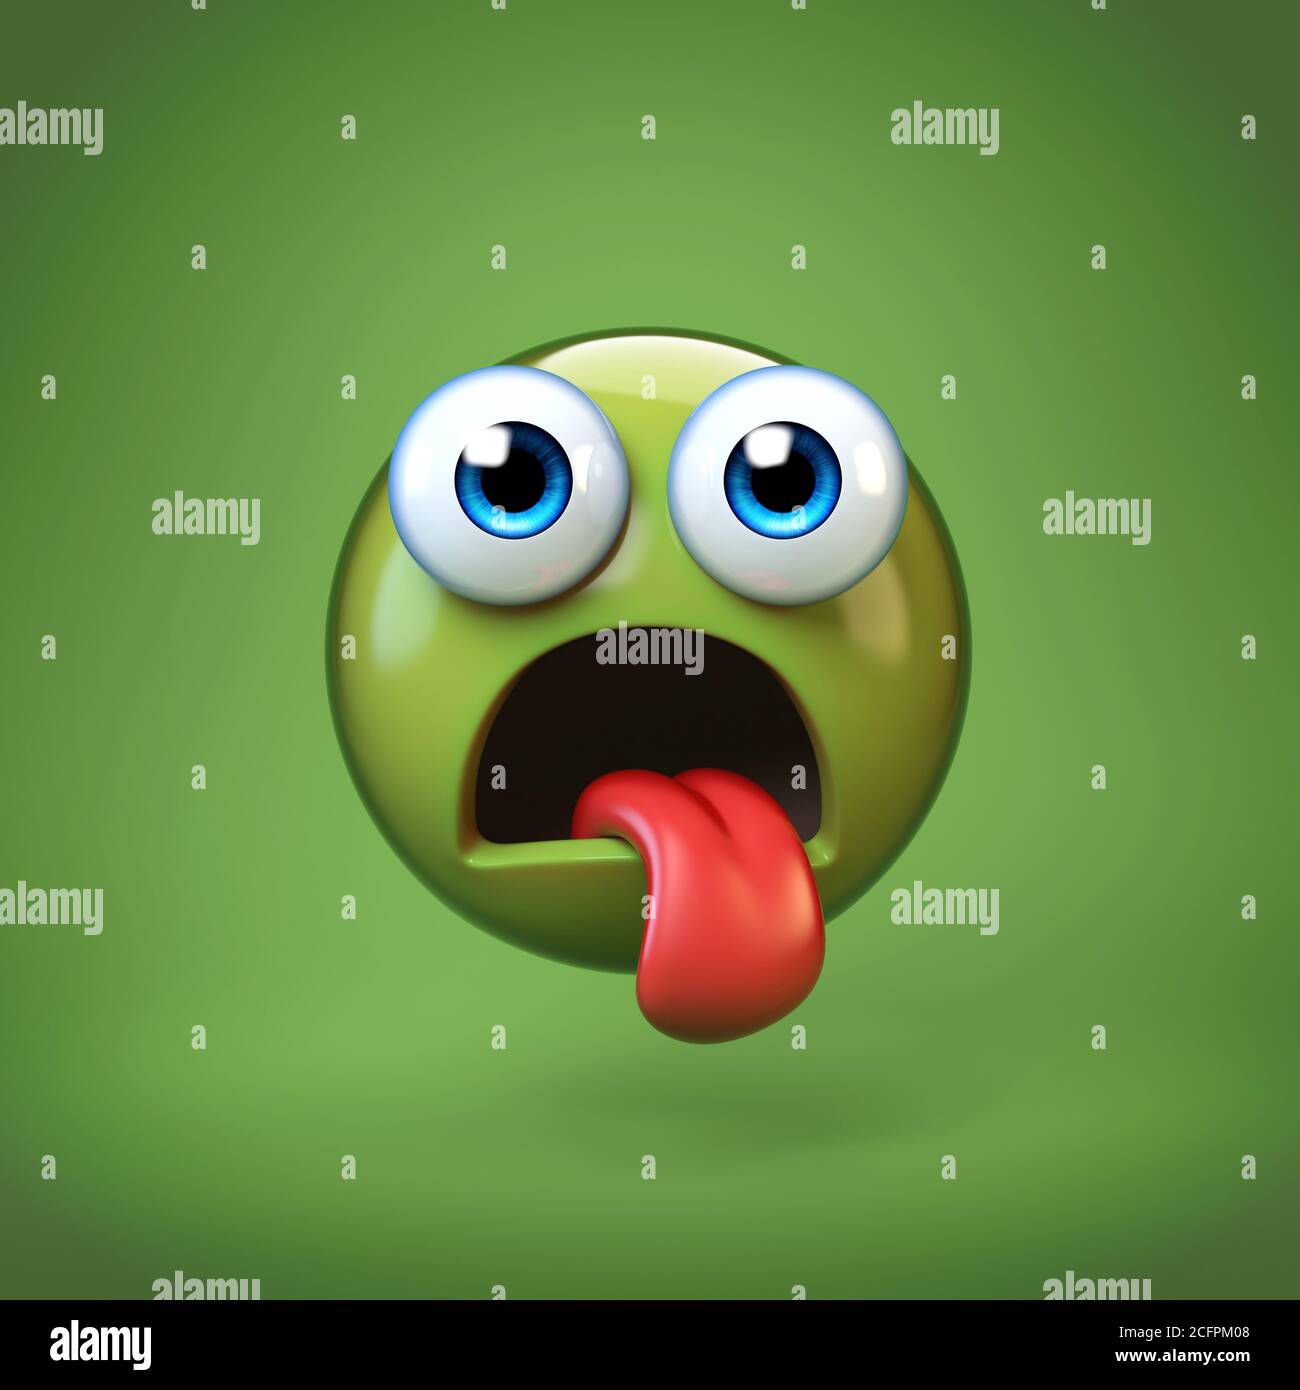 Sick emoji isolated on green background, green face emoticon 3d rendering Stock Photo